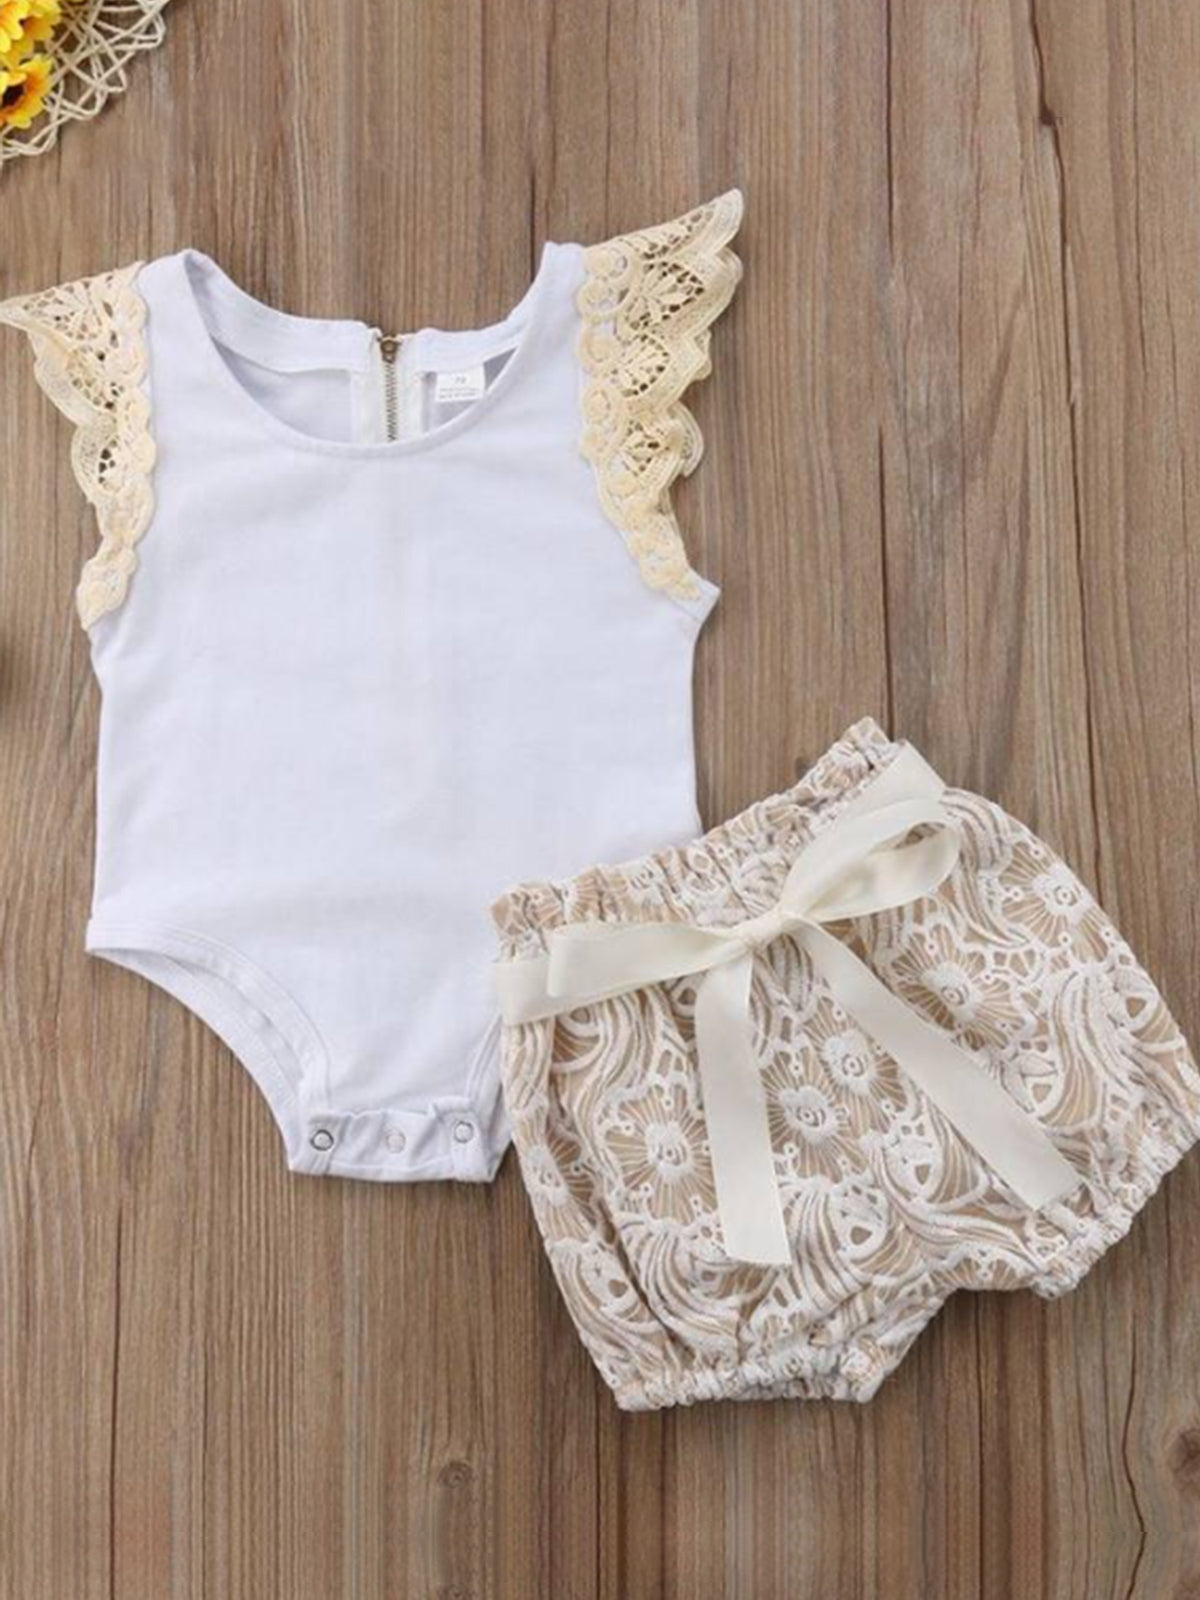 Baby set features a short-sleeved onesie with a crochet ruffle at the shoulder and embroidered shorts with a sash